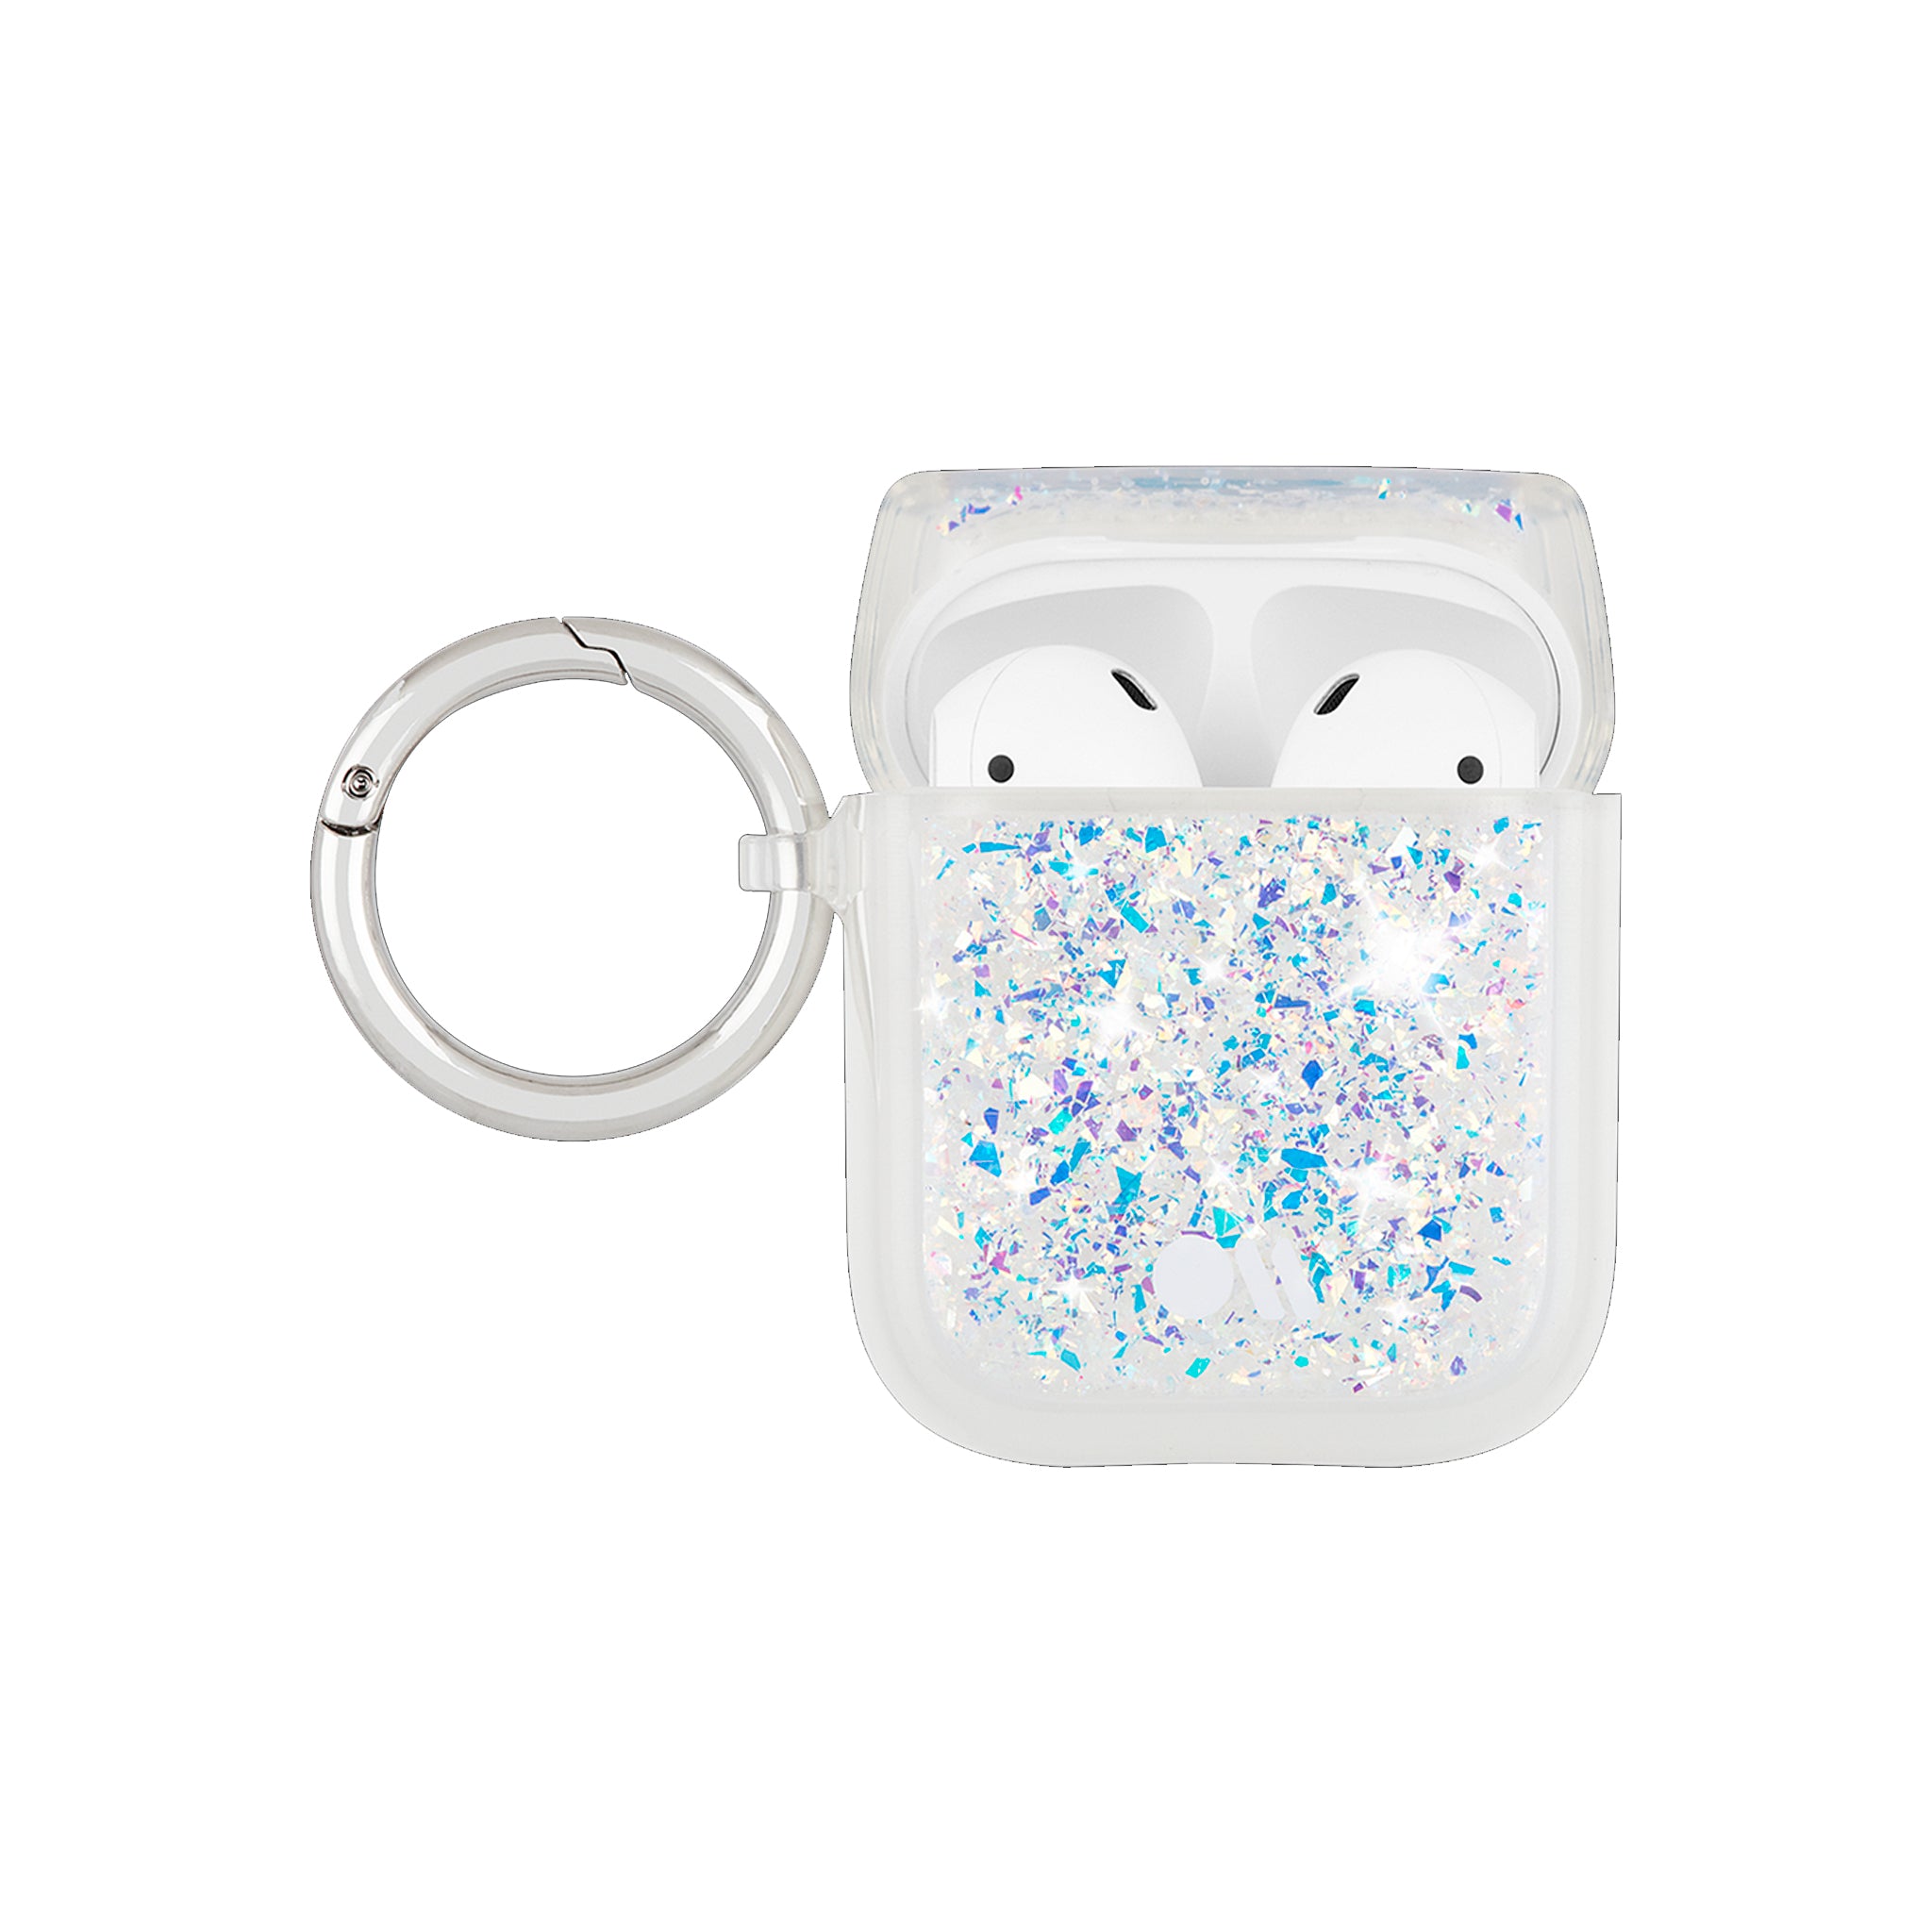 Case-mate - Twinkle Case For Apple Airpods - Stardust